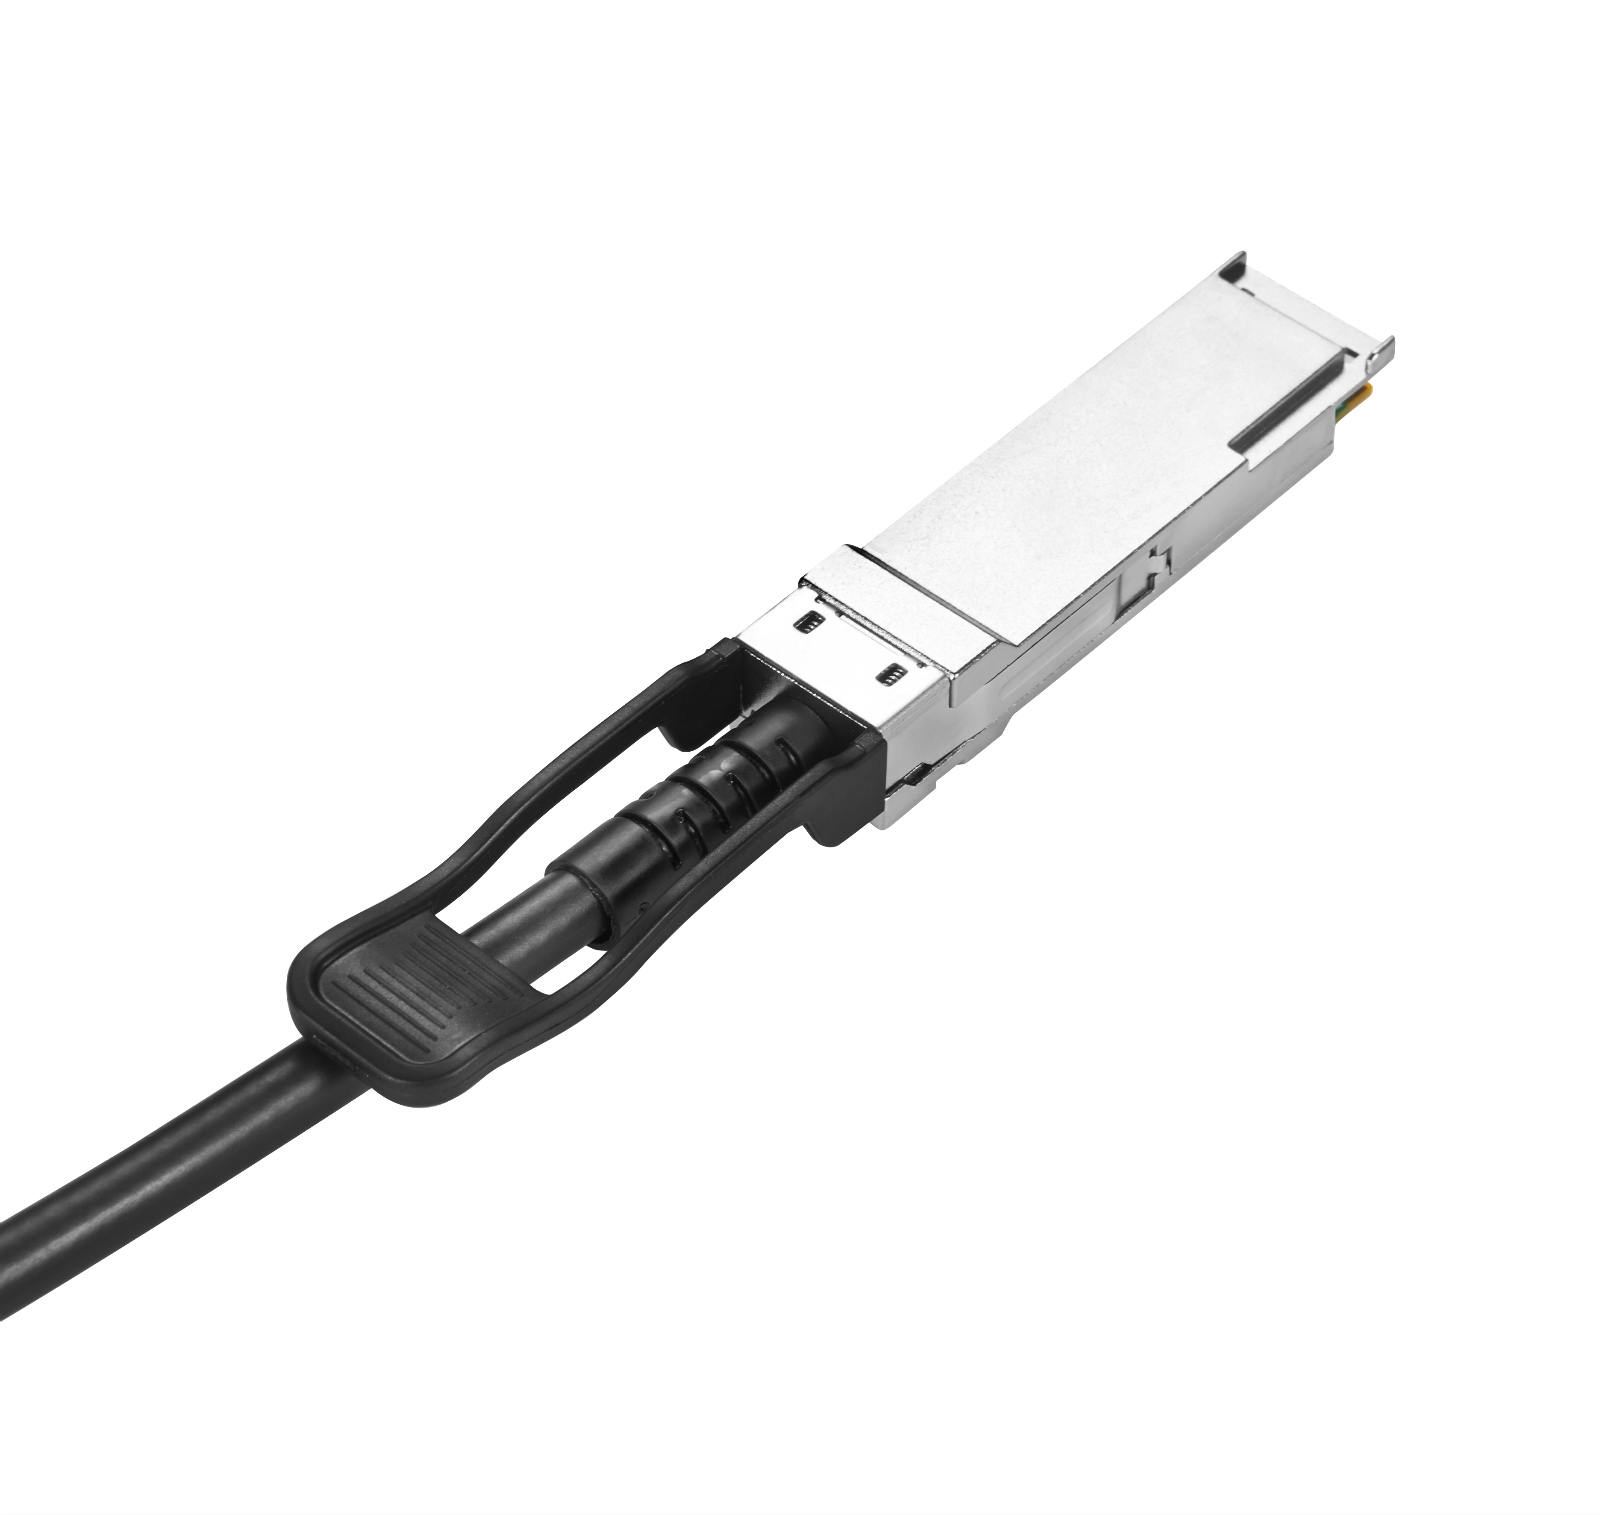 Come here,HTD-Infor has DAC Cable that meets your need